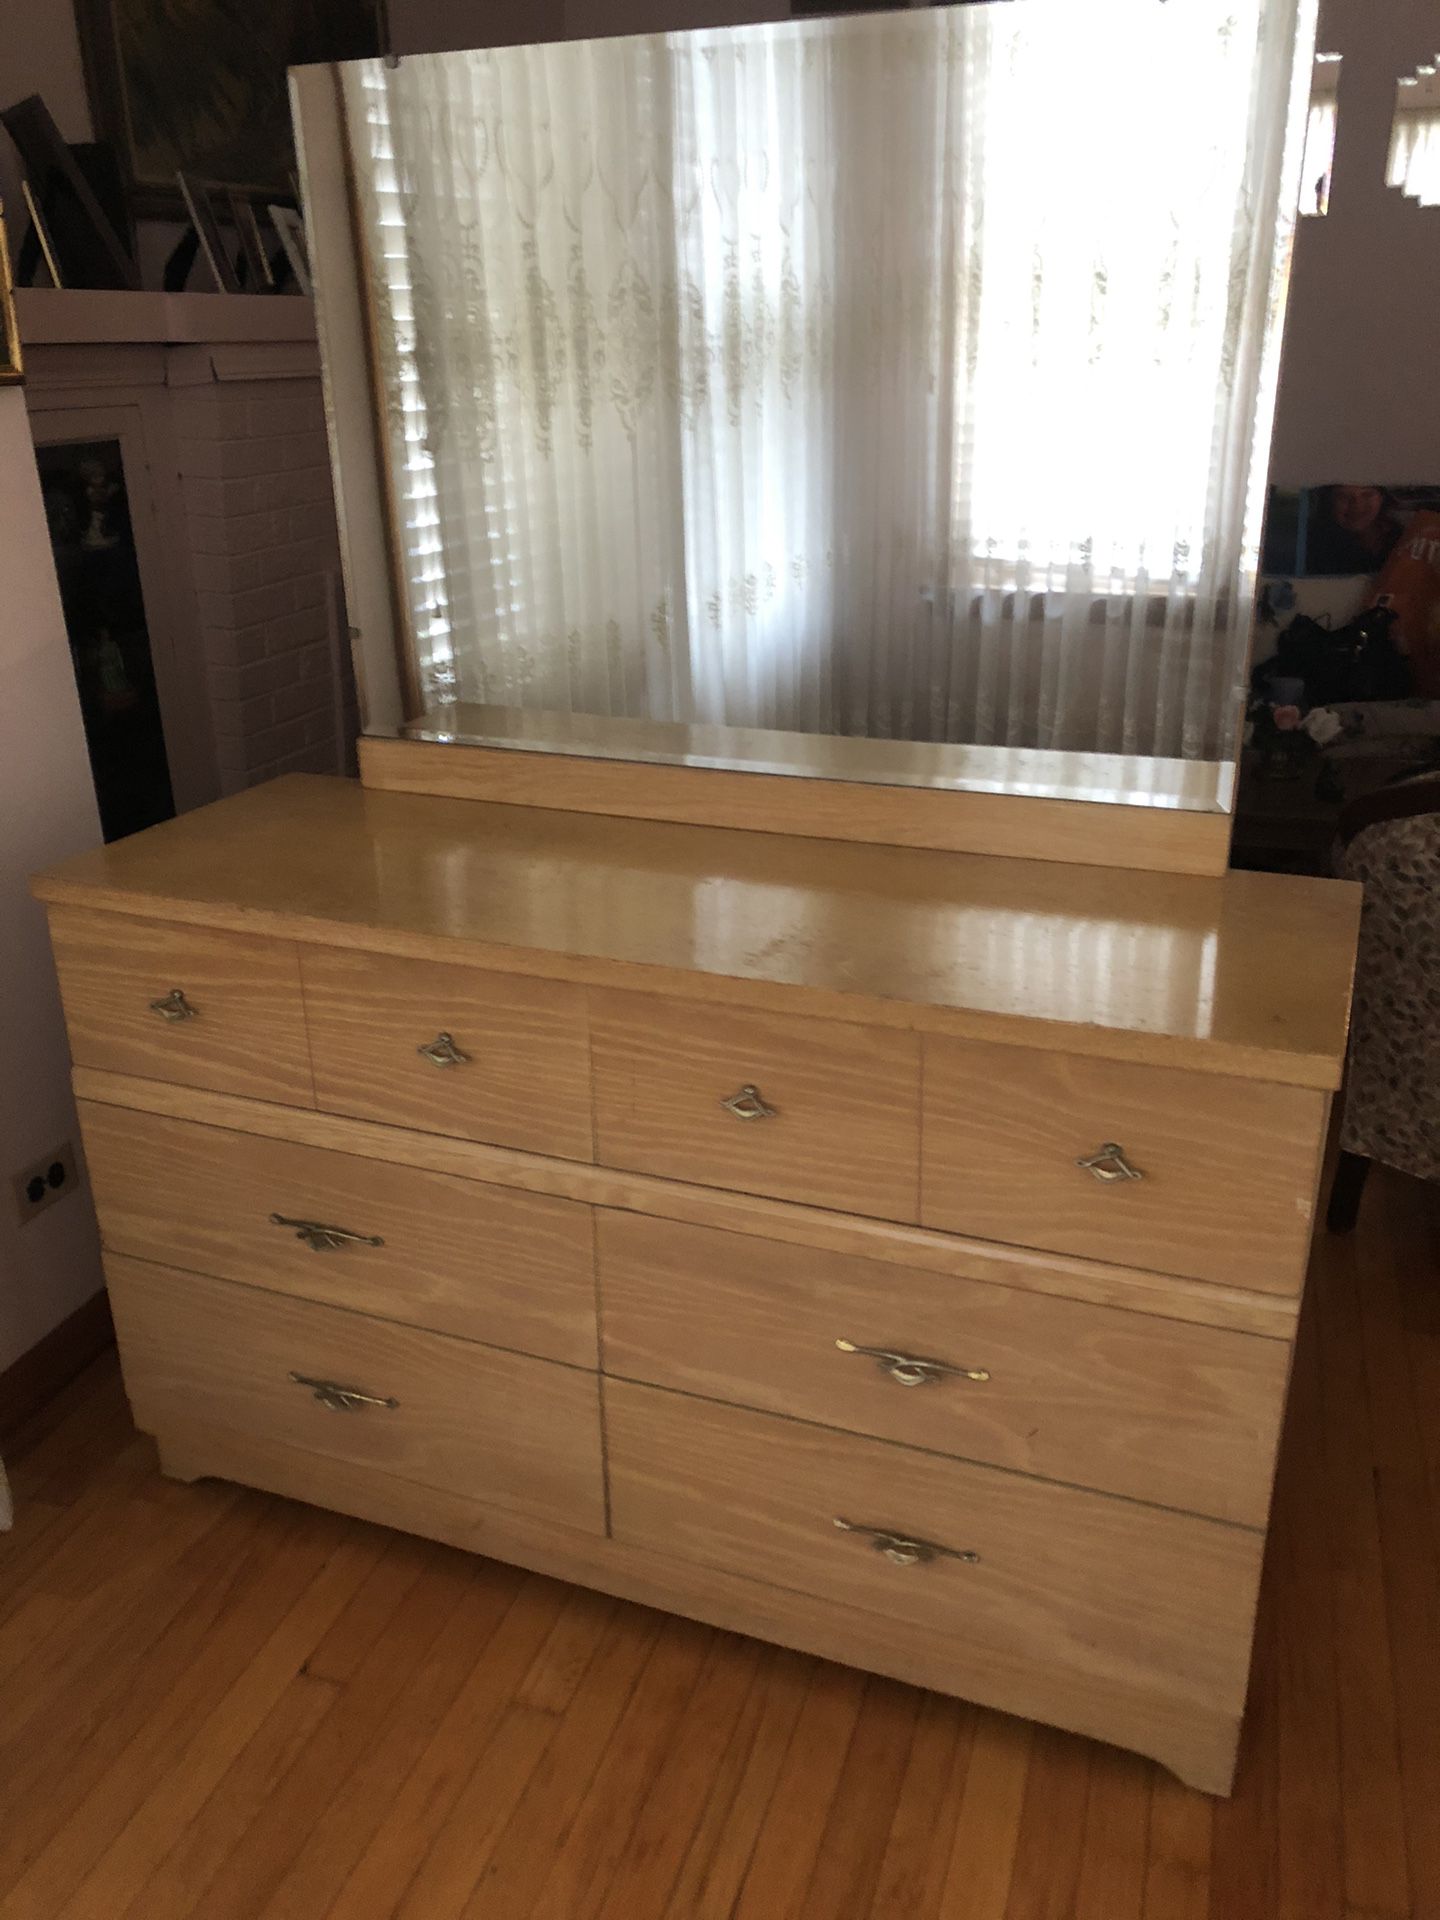 DRESSER WITH MIRROR AND NIGHTSTAND VINTAGE 